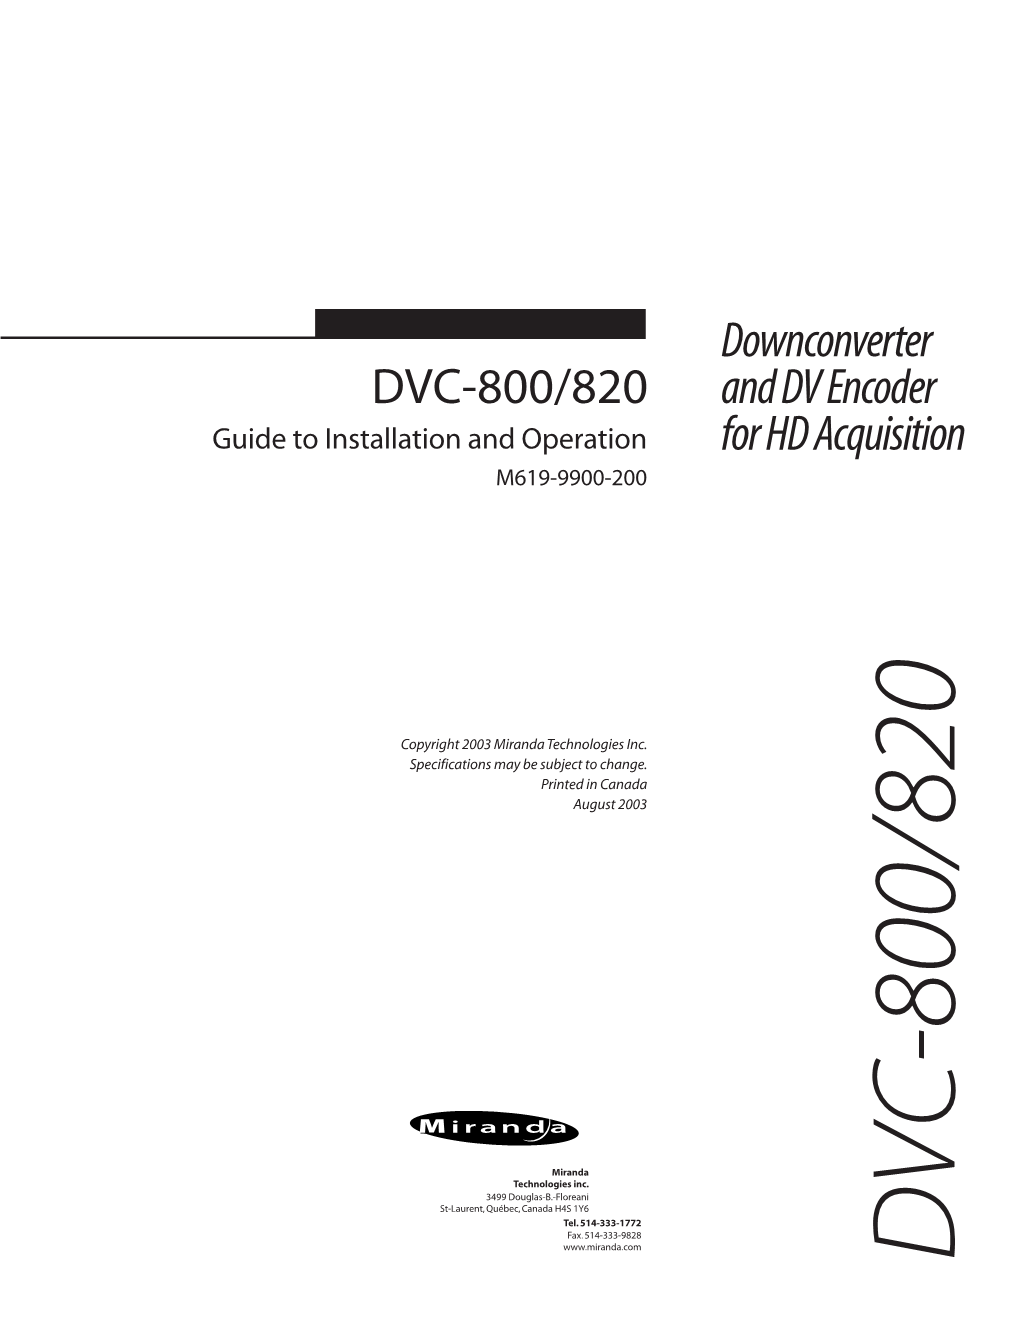 DVC-800/820 Downconverter and DV Encoder for HD Acquisition